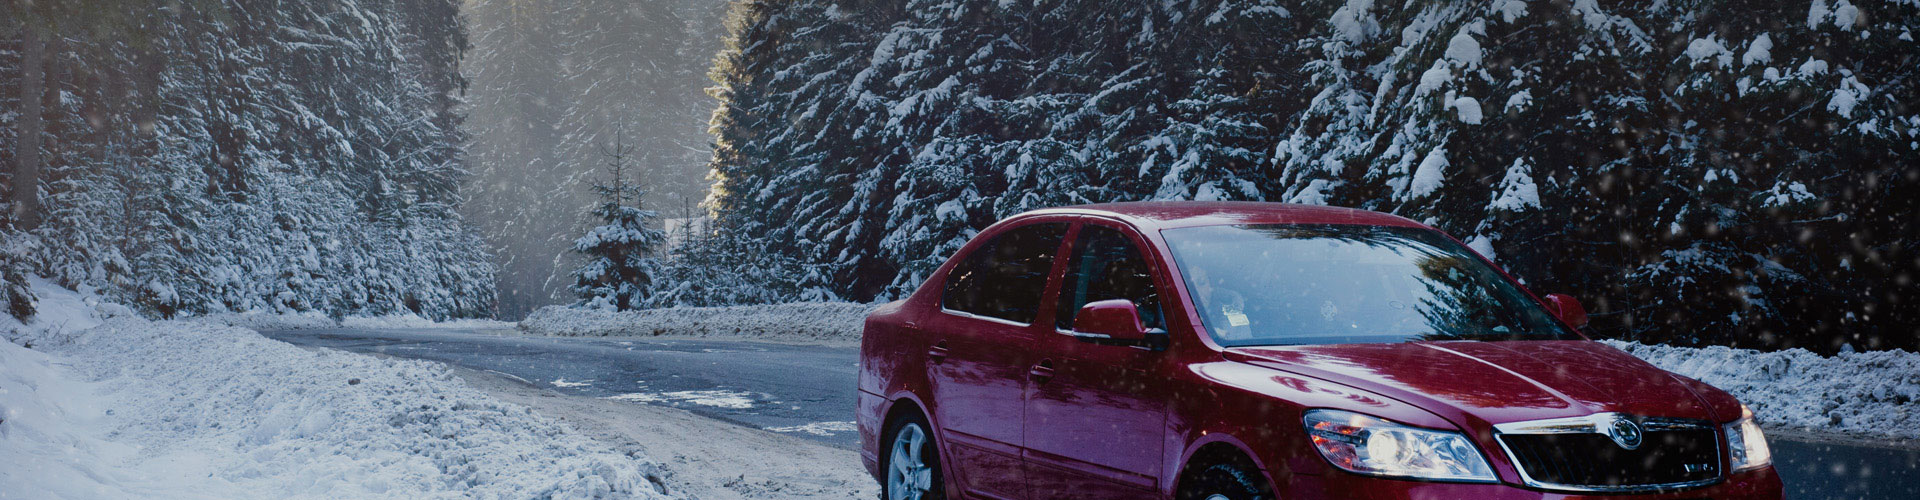 A photo of a car on a snowy roadway, demonstrating the importance of having car insurance in Maine